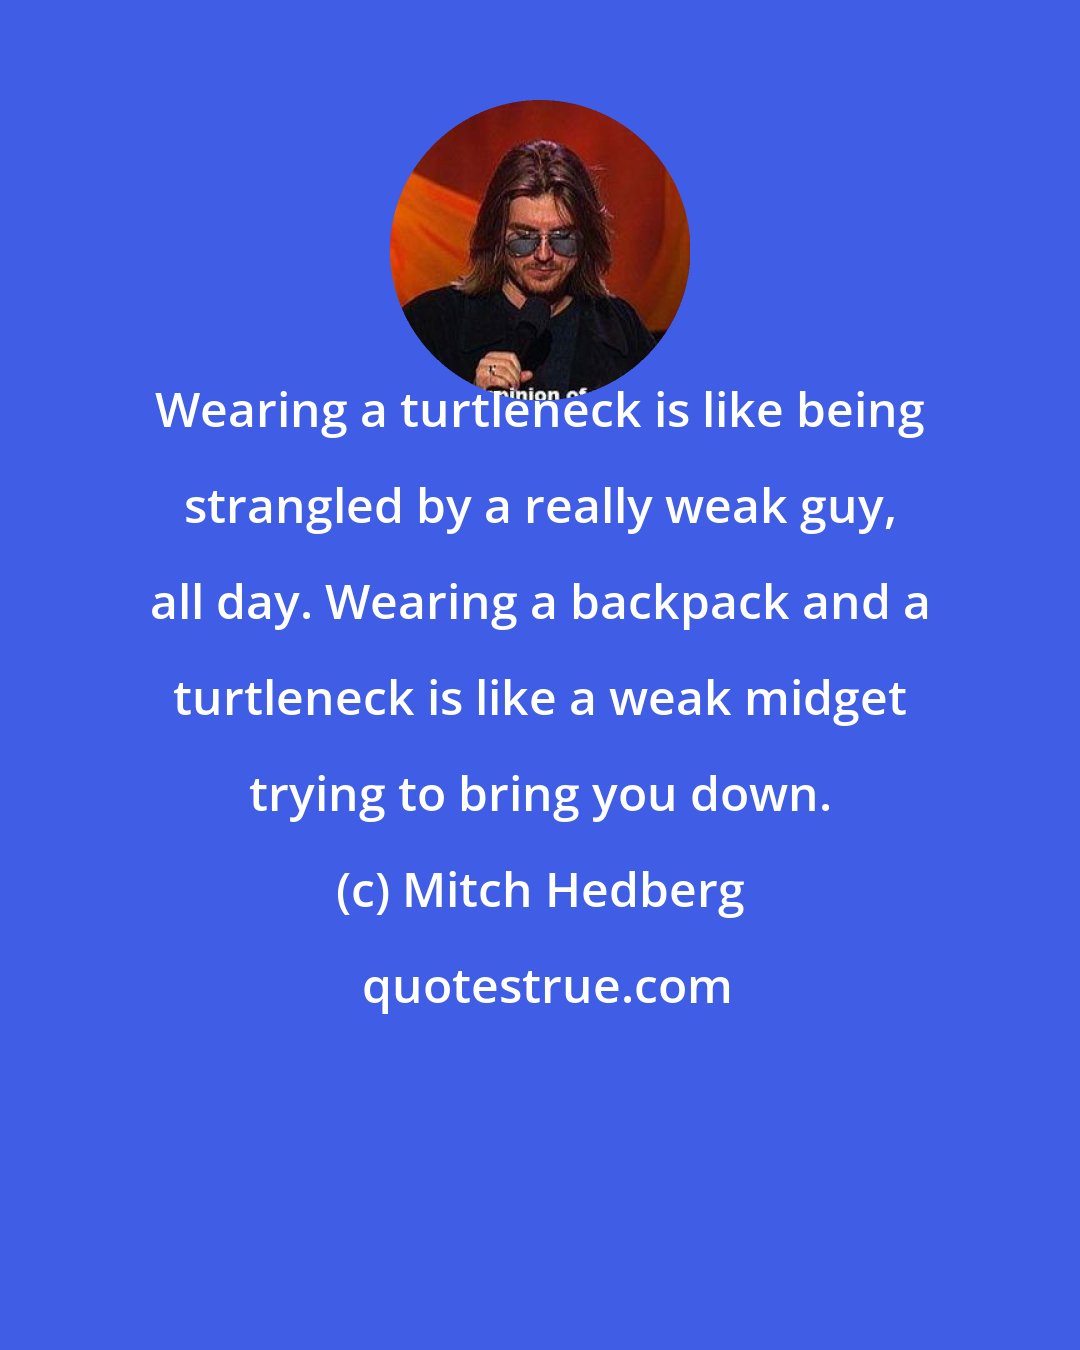 Mitch Hedberg: Wearing a turtleneck is like being strangled by a really weak guy, all day. Wearing a backpack and a turtleneck is like a weak midget trying to bring you down.